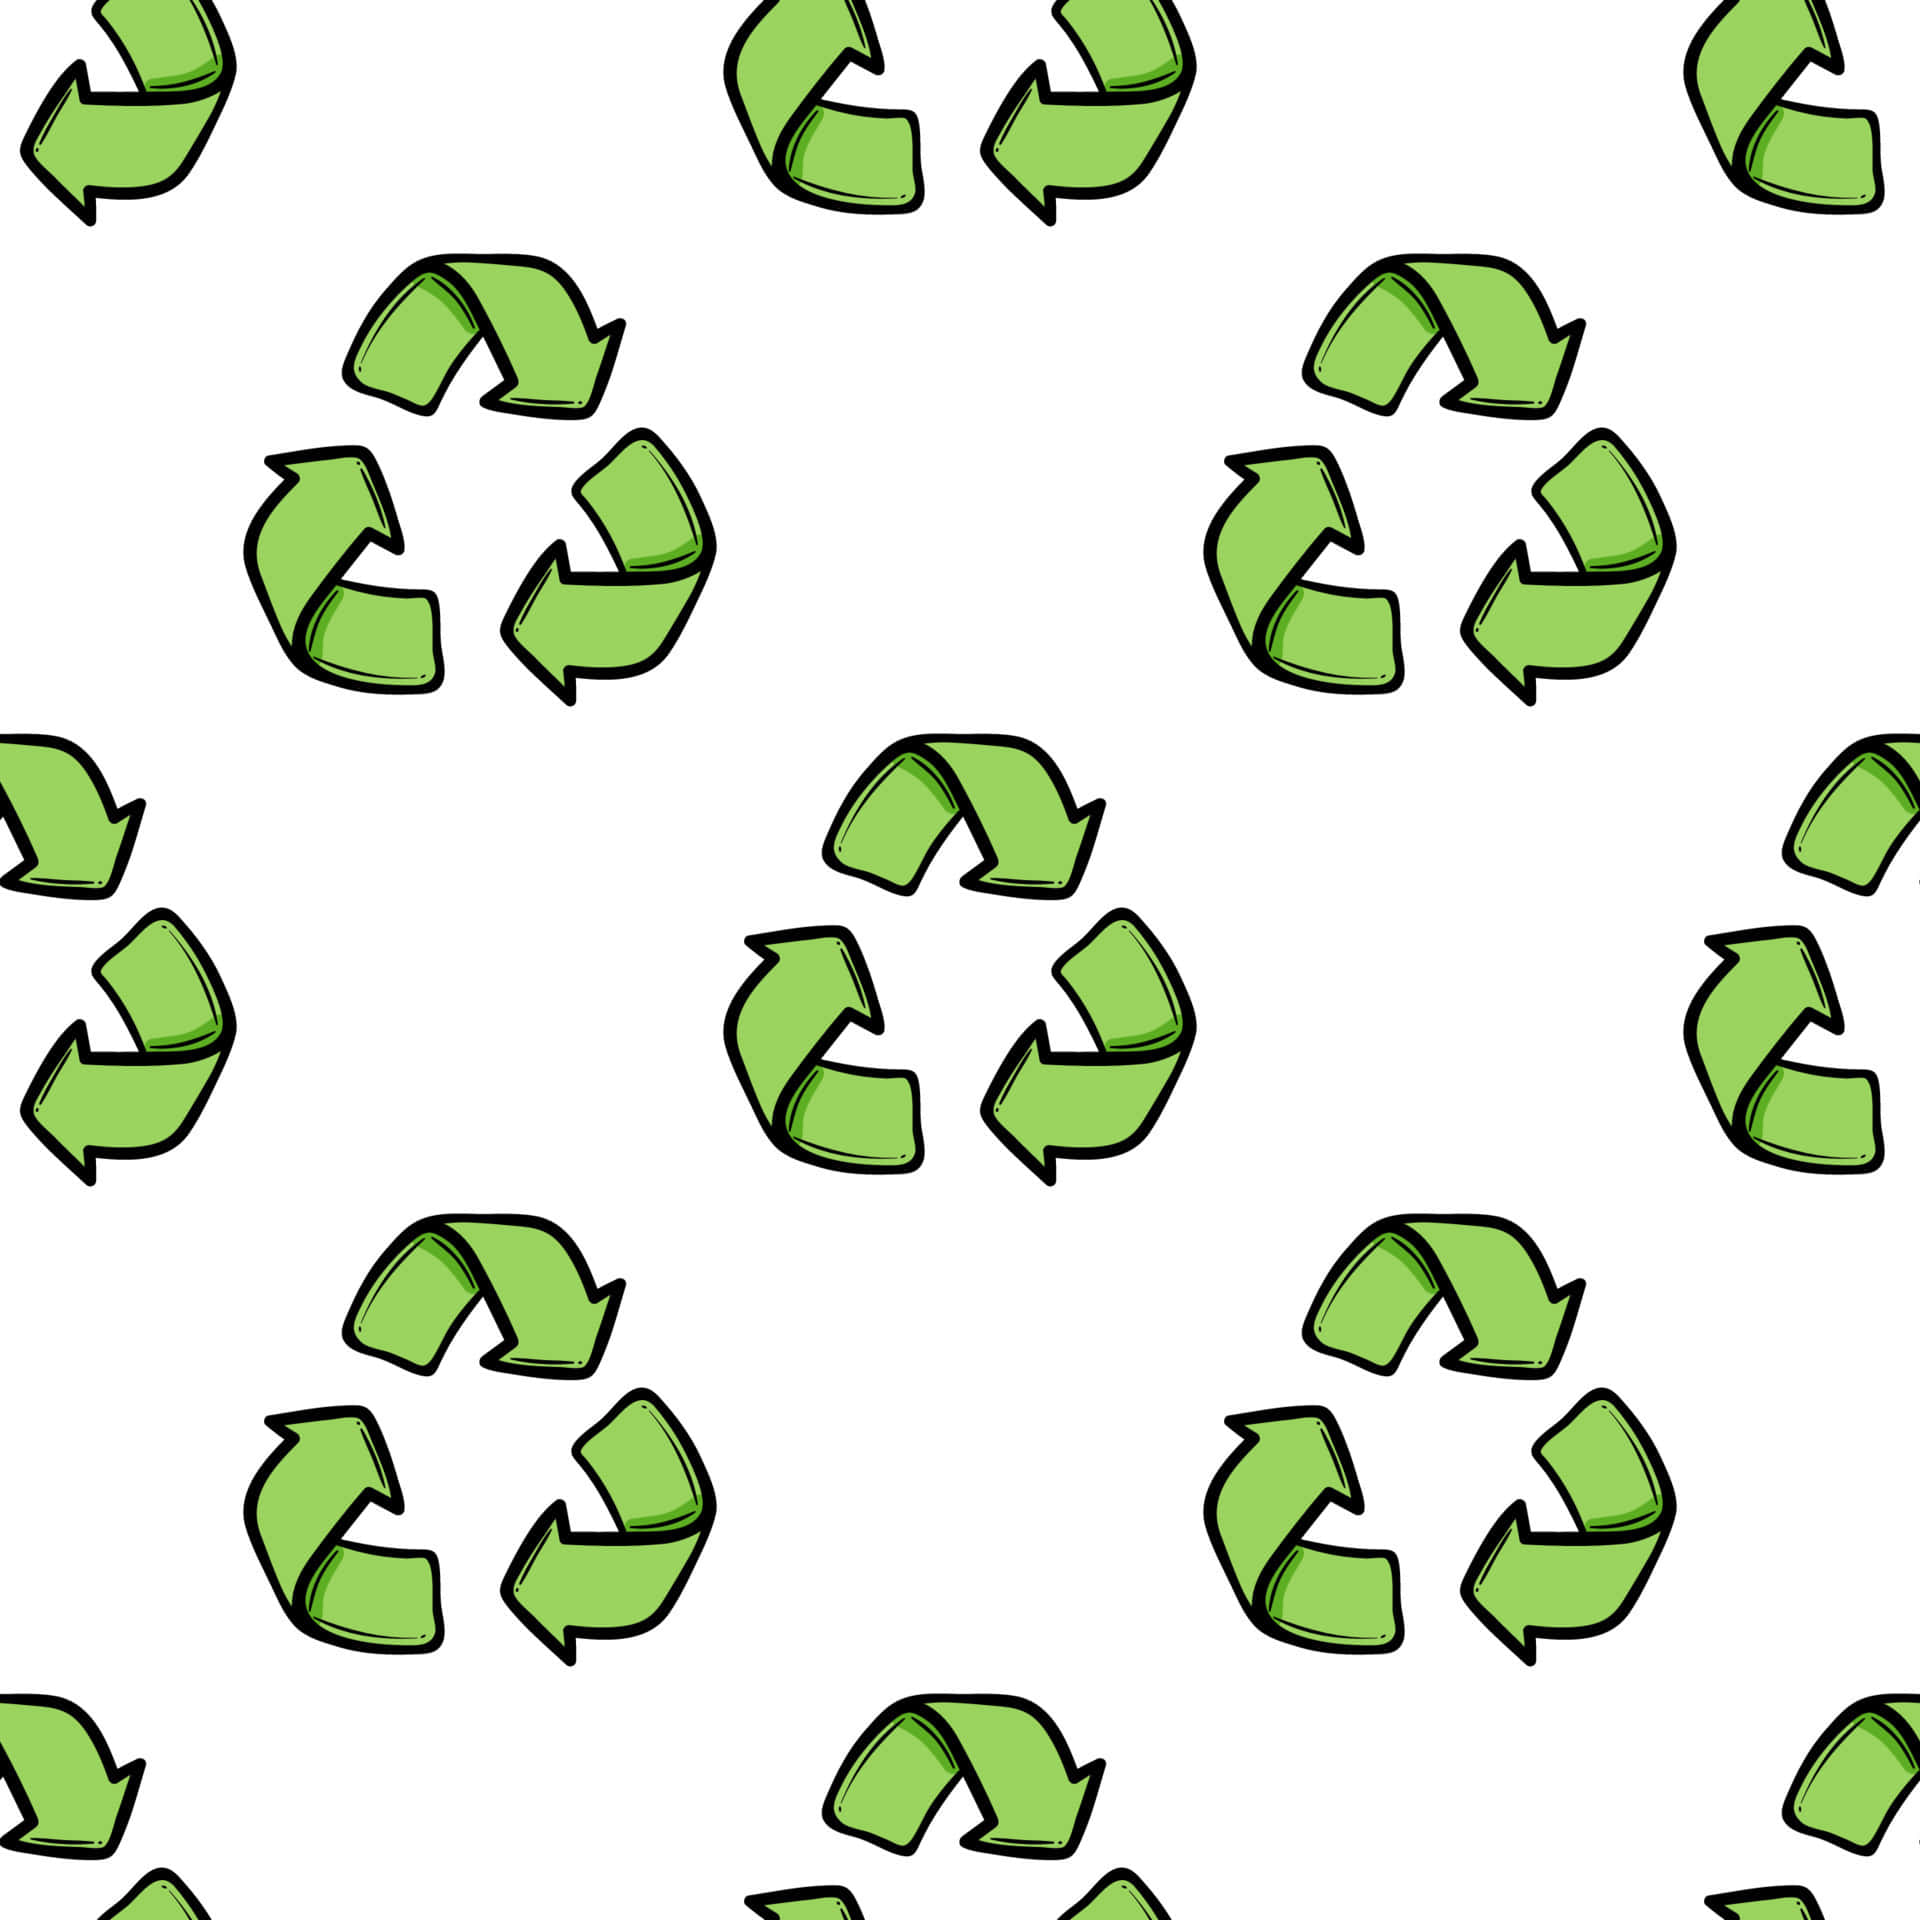 Waste Recycling Picture